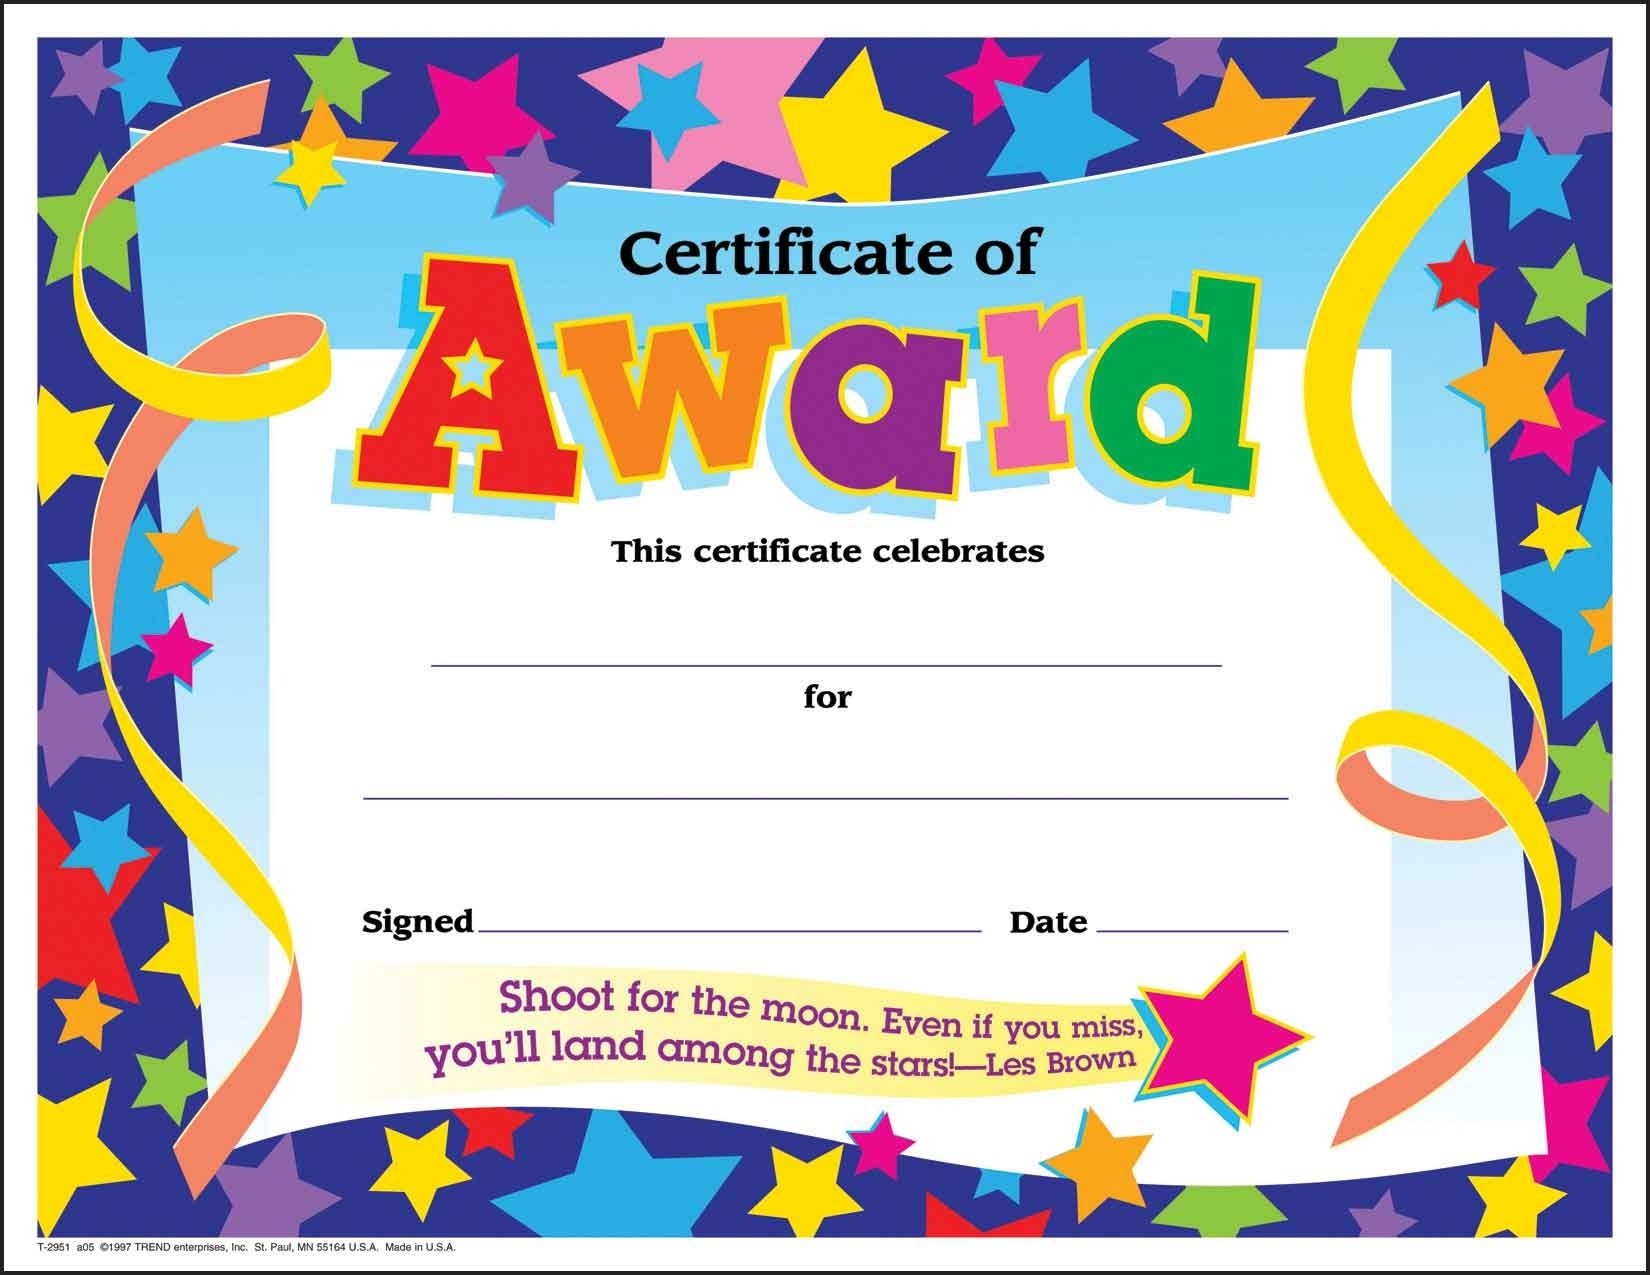 10 Awesome Student Of The Week Ideas ideas collection star student certificate template also student of 2022